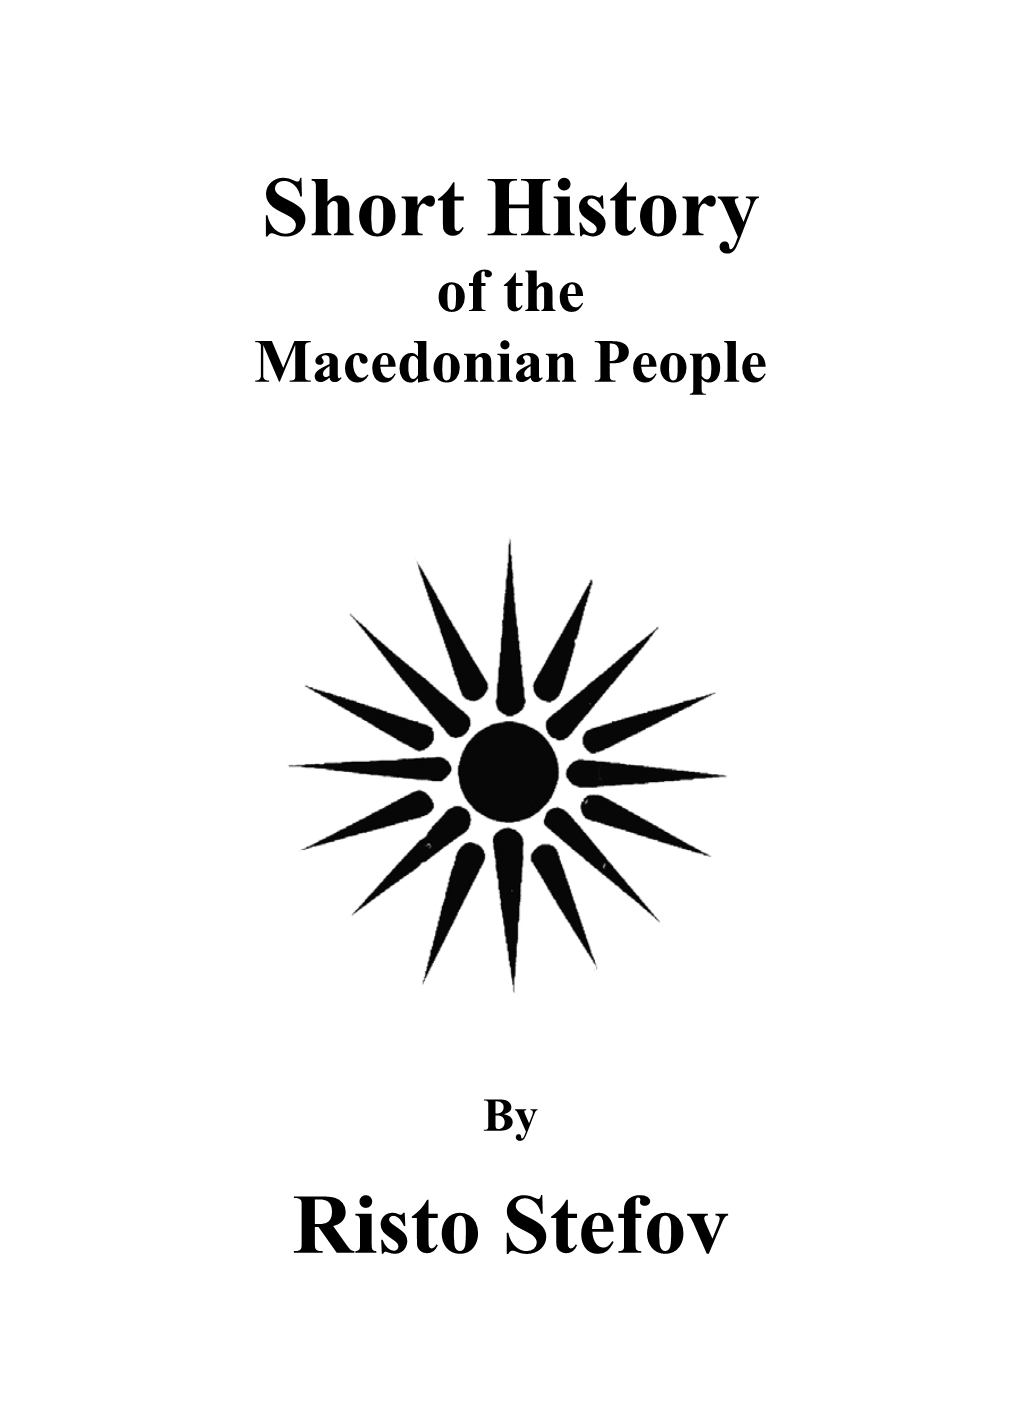 Short History of the Macedonian People